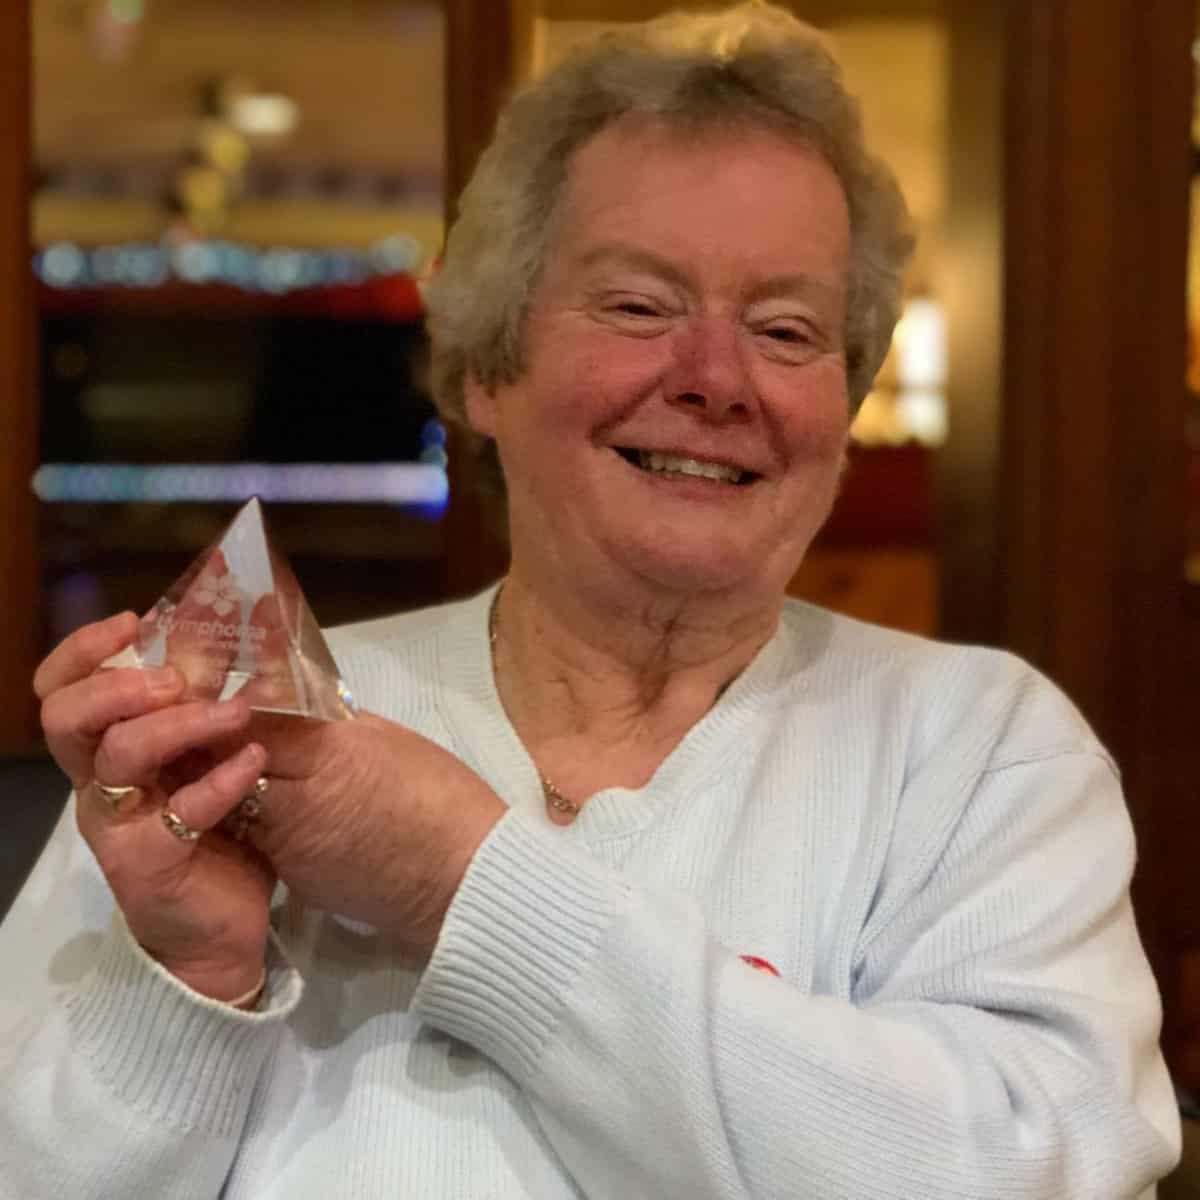 Carol Miller, founder of York Haematology Support group and Acute Myeloid Leukaemia survivor smiling and holding an award from the Lymphoma Association.